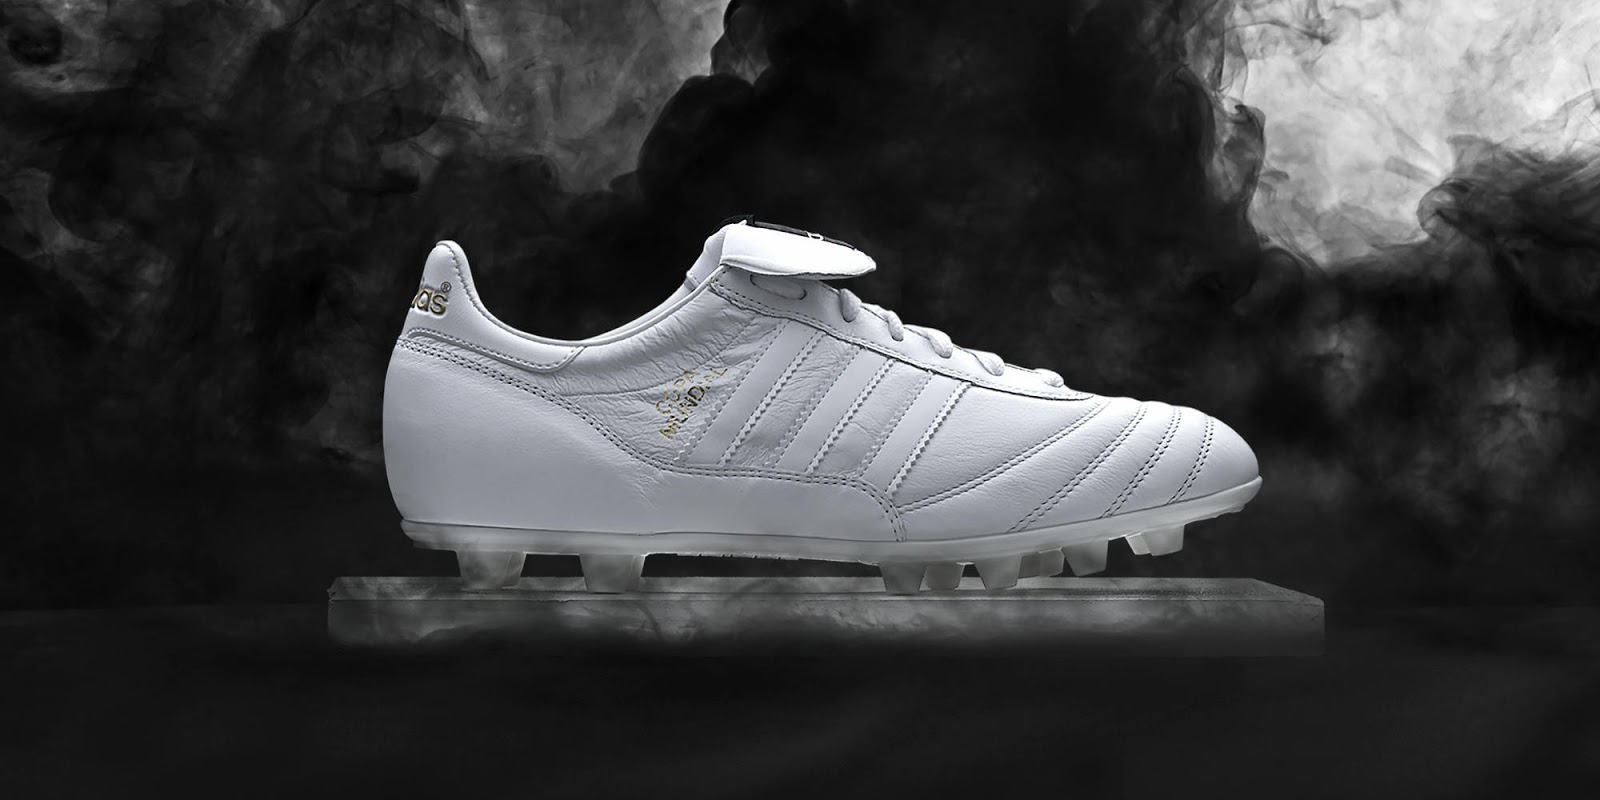 Adidas Copa Mundial Boot Released - Footy